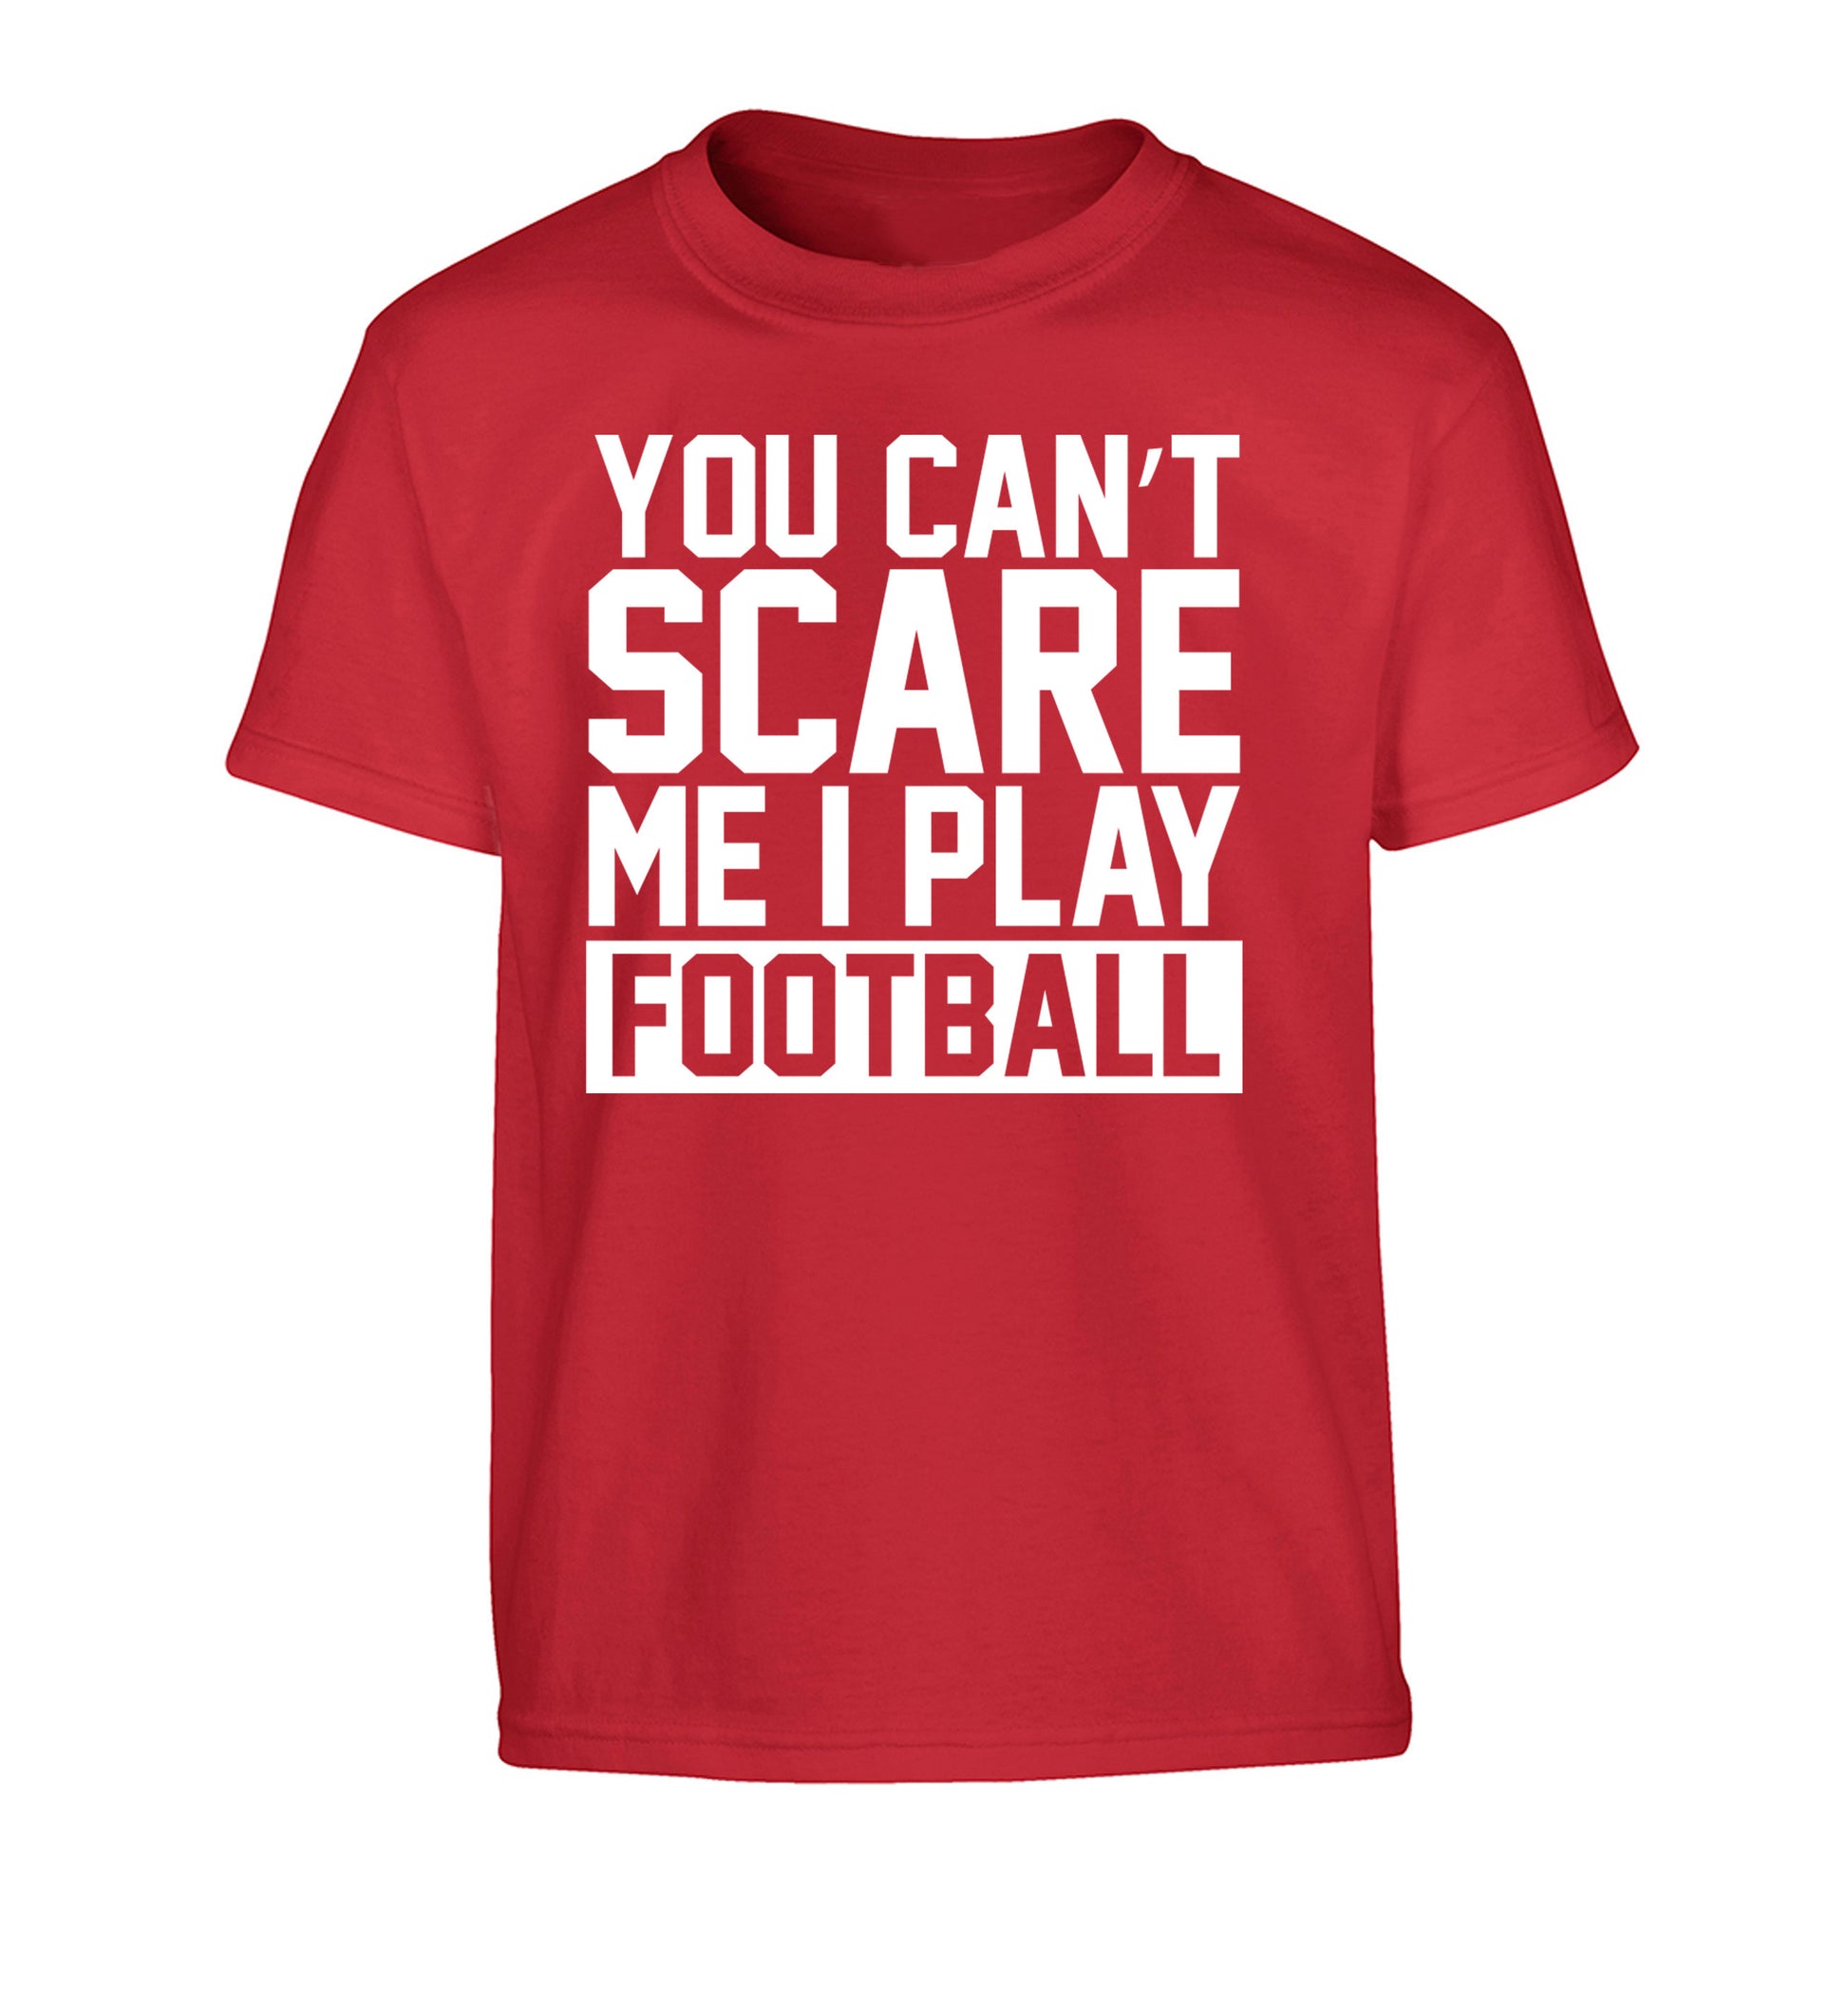 You can't scare me I play football Children's red Tshirt 12-14 Years